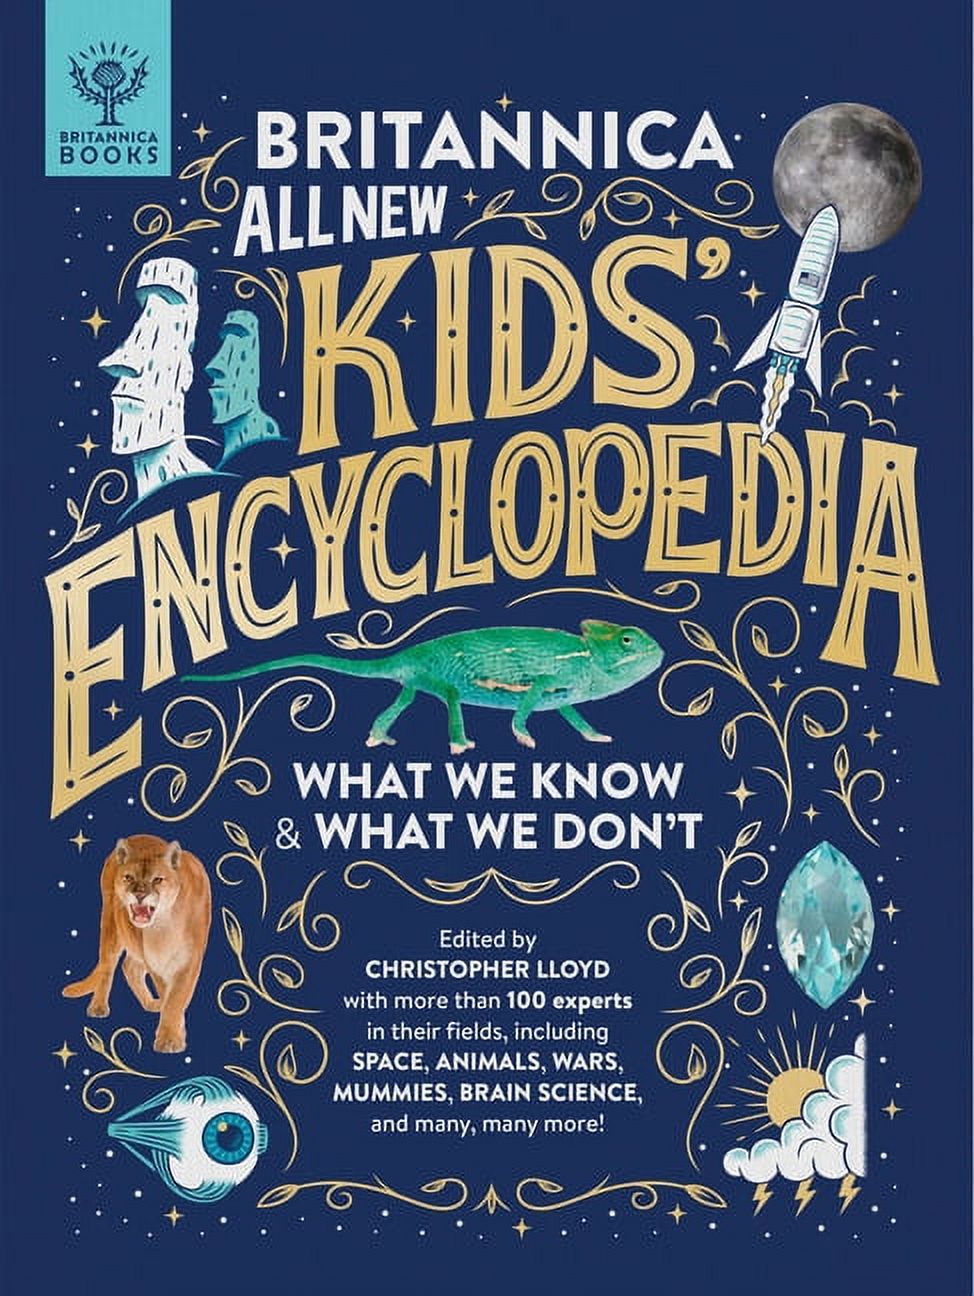 Britannica All New Kids' Encyclopedia: What We Know & What We Don't (Hardcover) - image 1 of 8